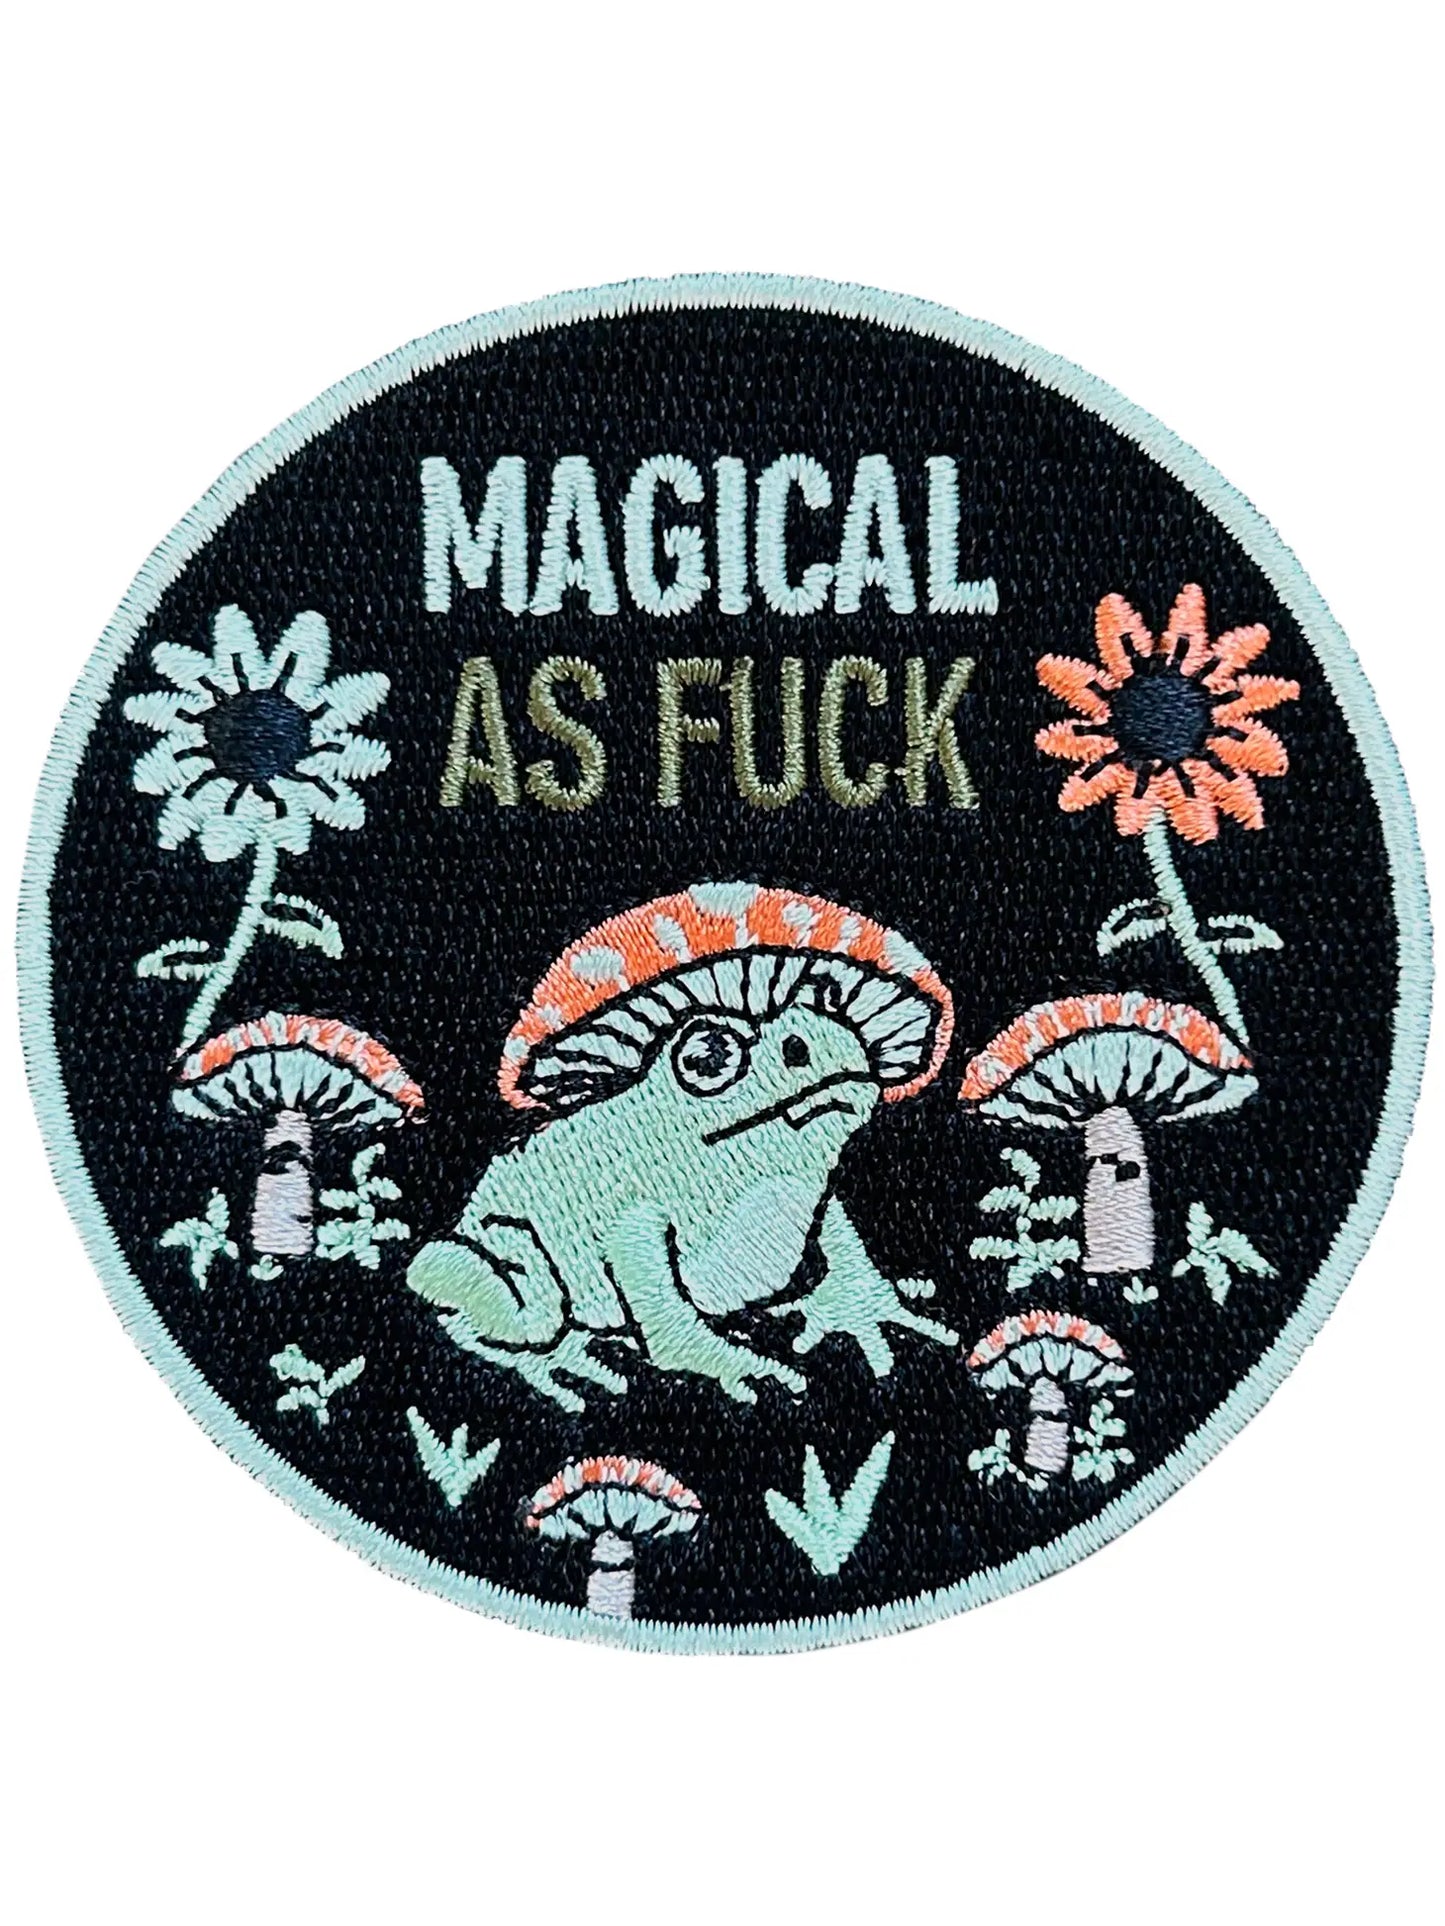 Magical As Fuck Patch